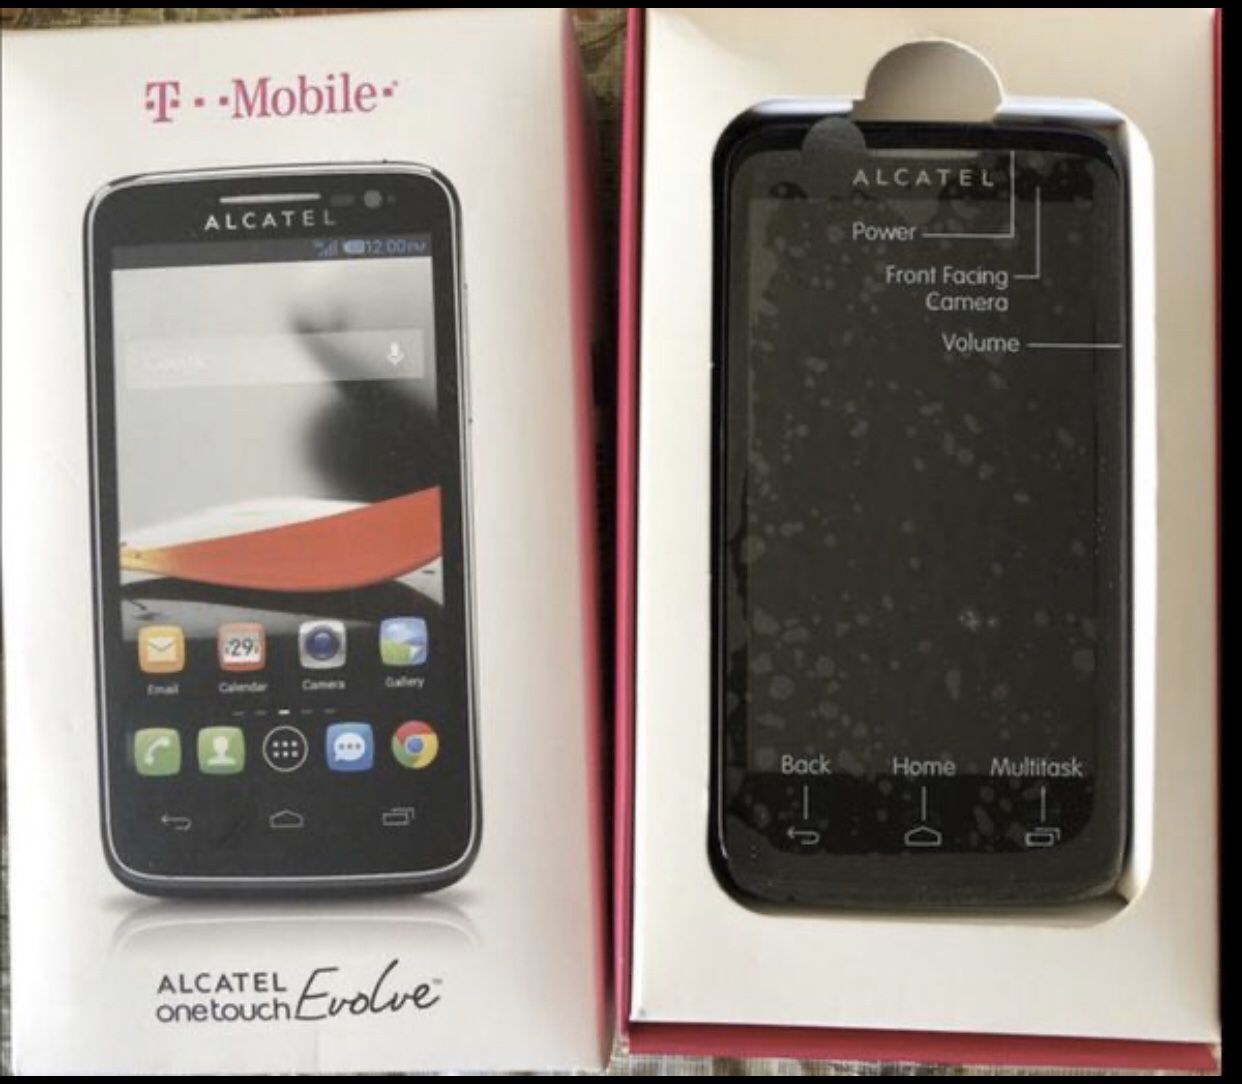 Smart Phone Alcatel Brand new come with box, unused, great for kids or grandparents!!